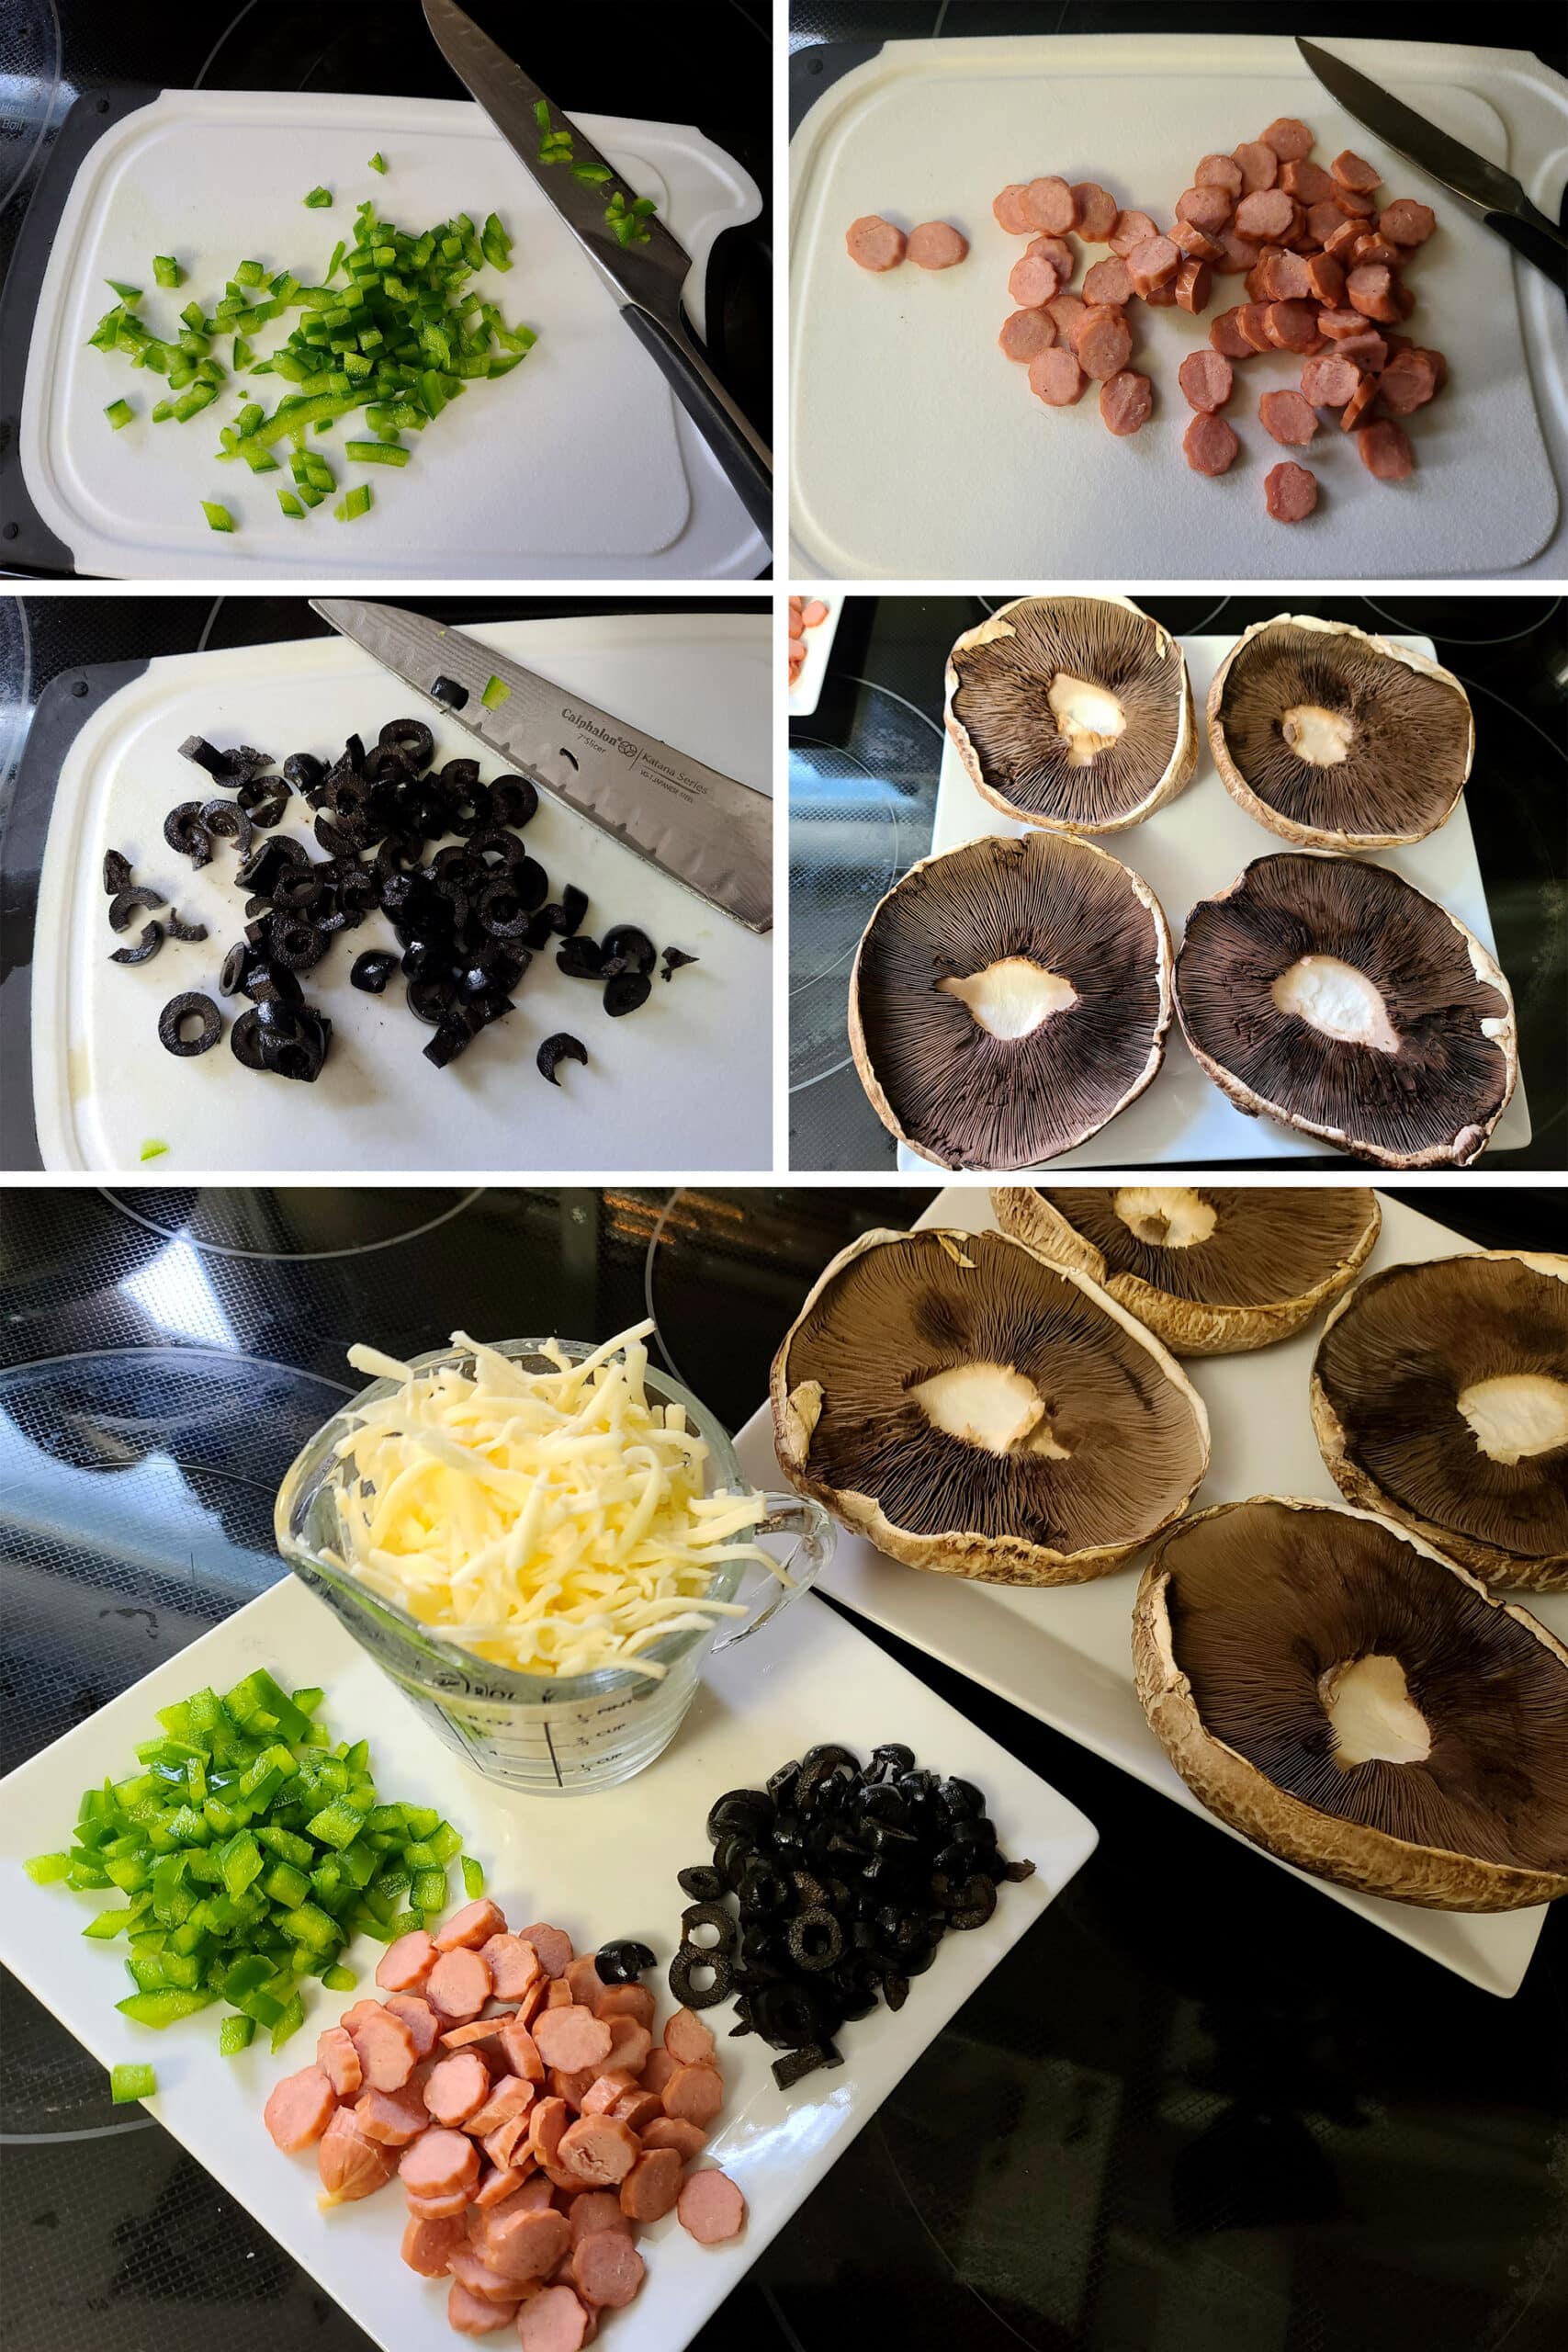 A 5 part image showing the pepper, pepperoni, and black olives being chopped, the mushrooms being prepared, and everything laid out, ready to assemble.